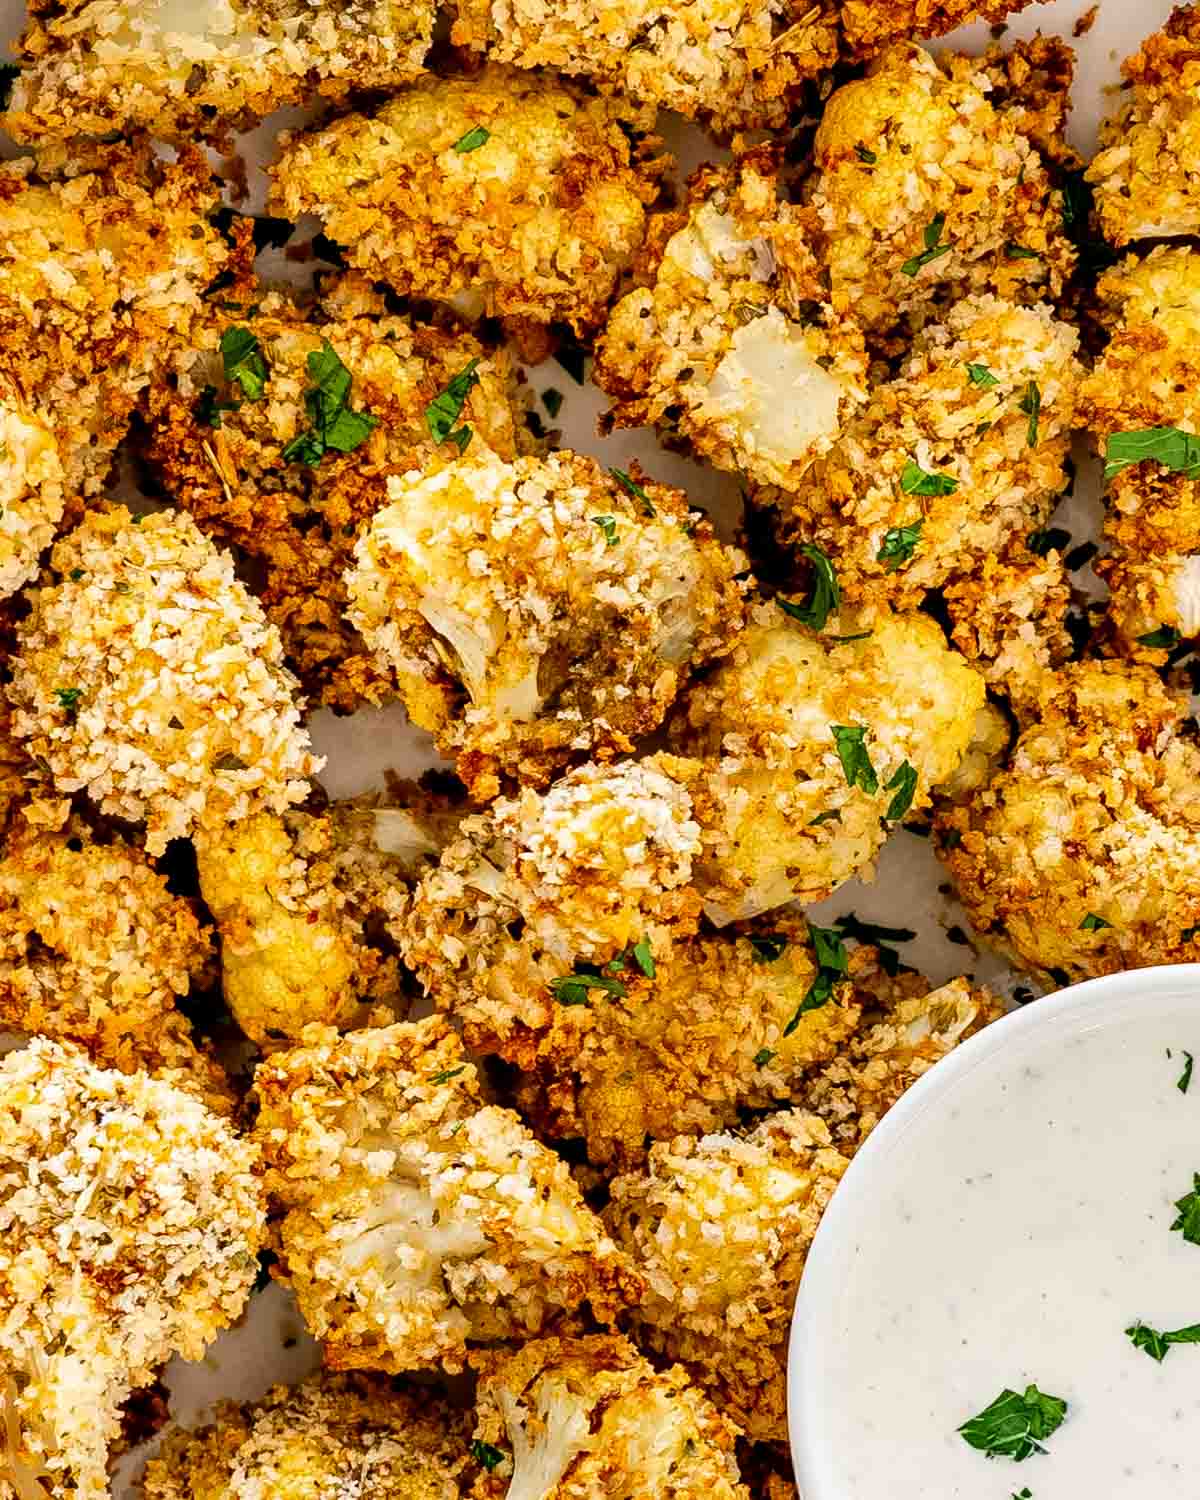 baked breaded cauliflower in a white bowl with ranch dressing.